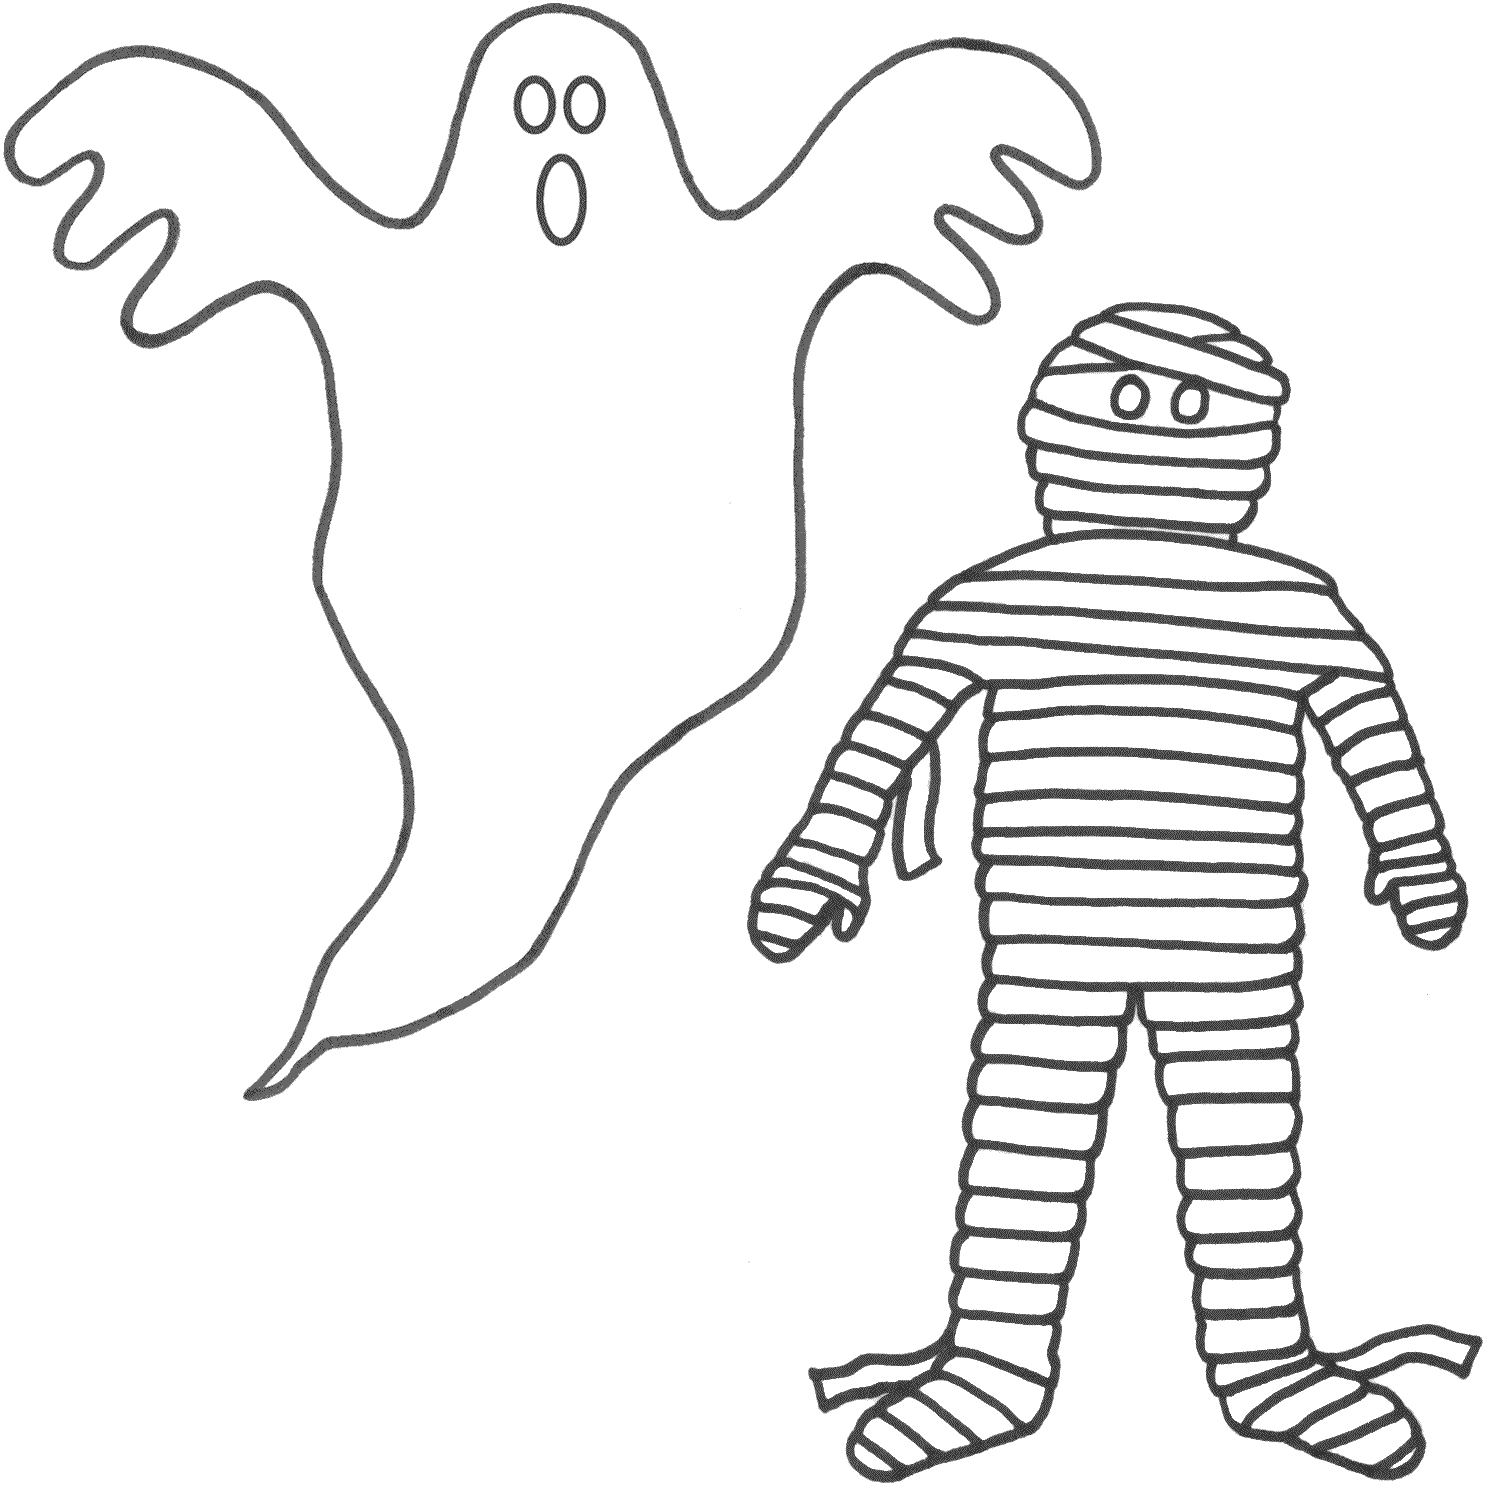 friendly ghost coloring page